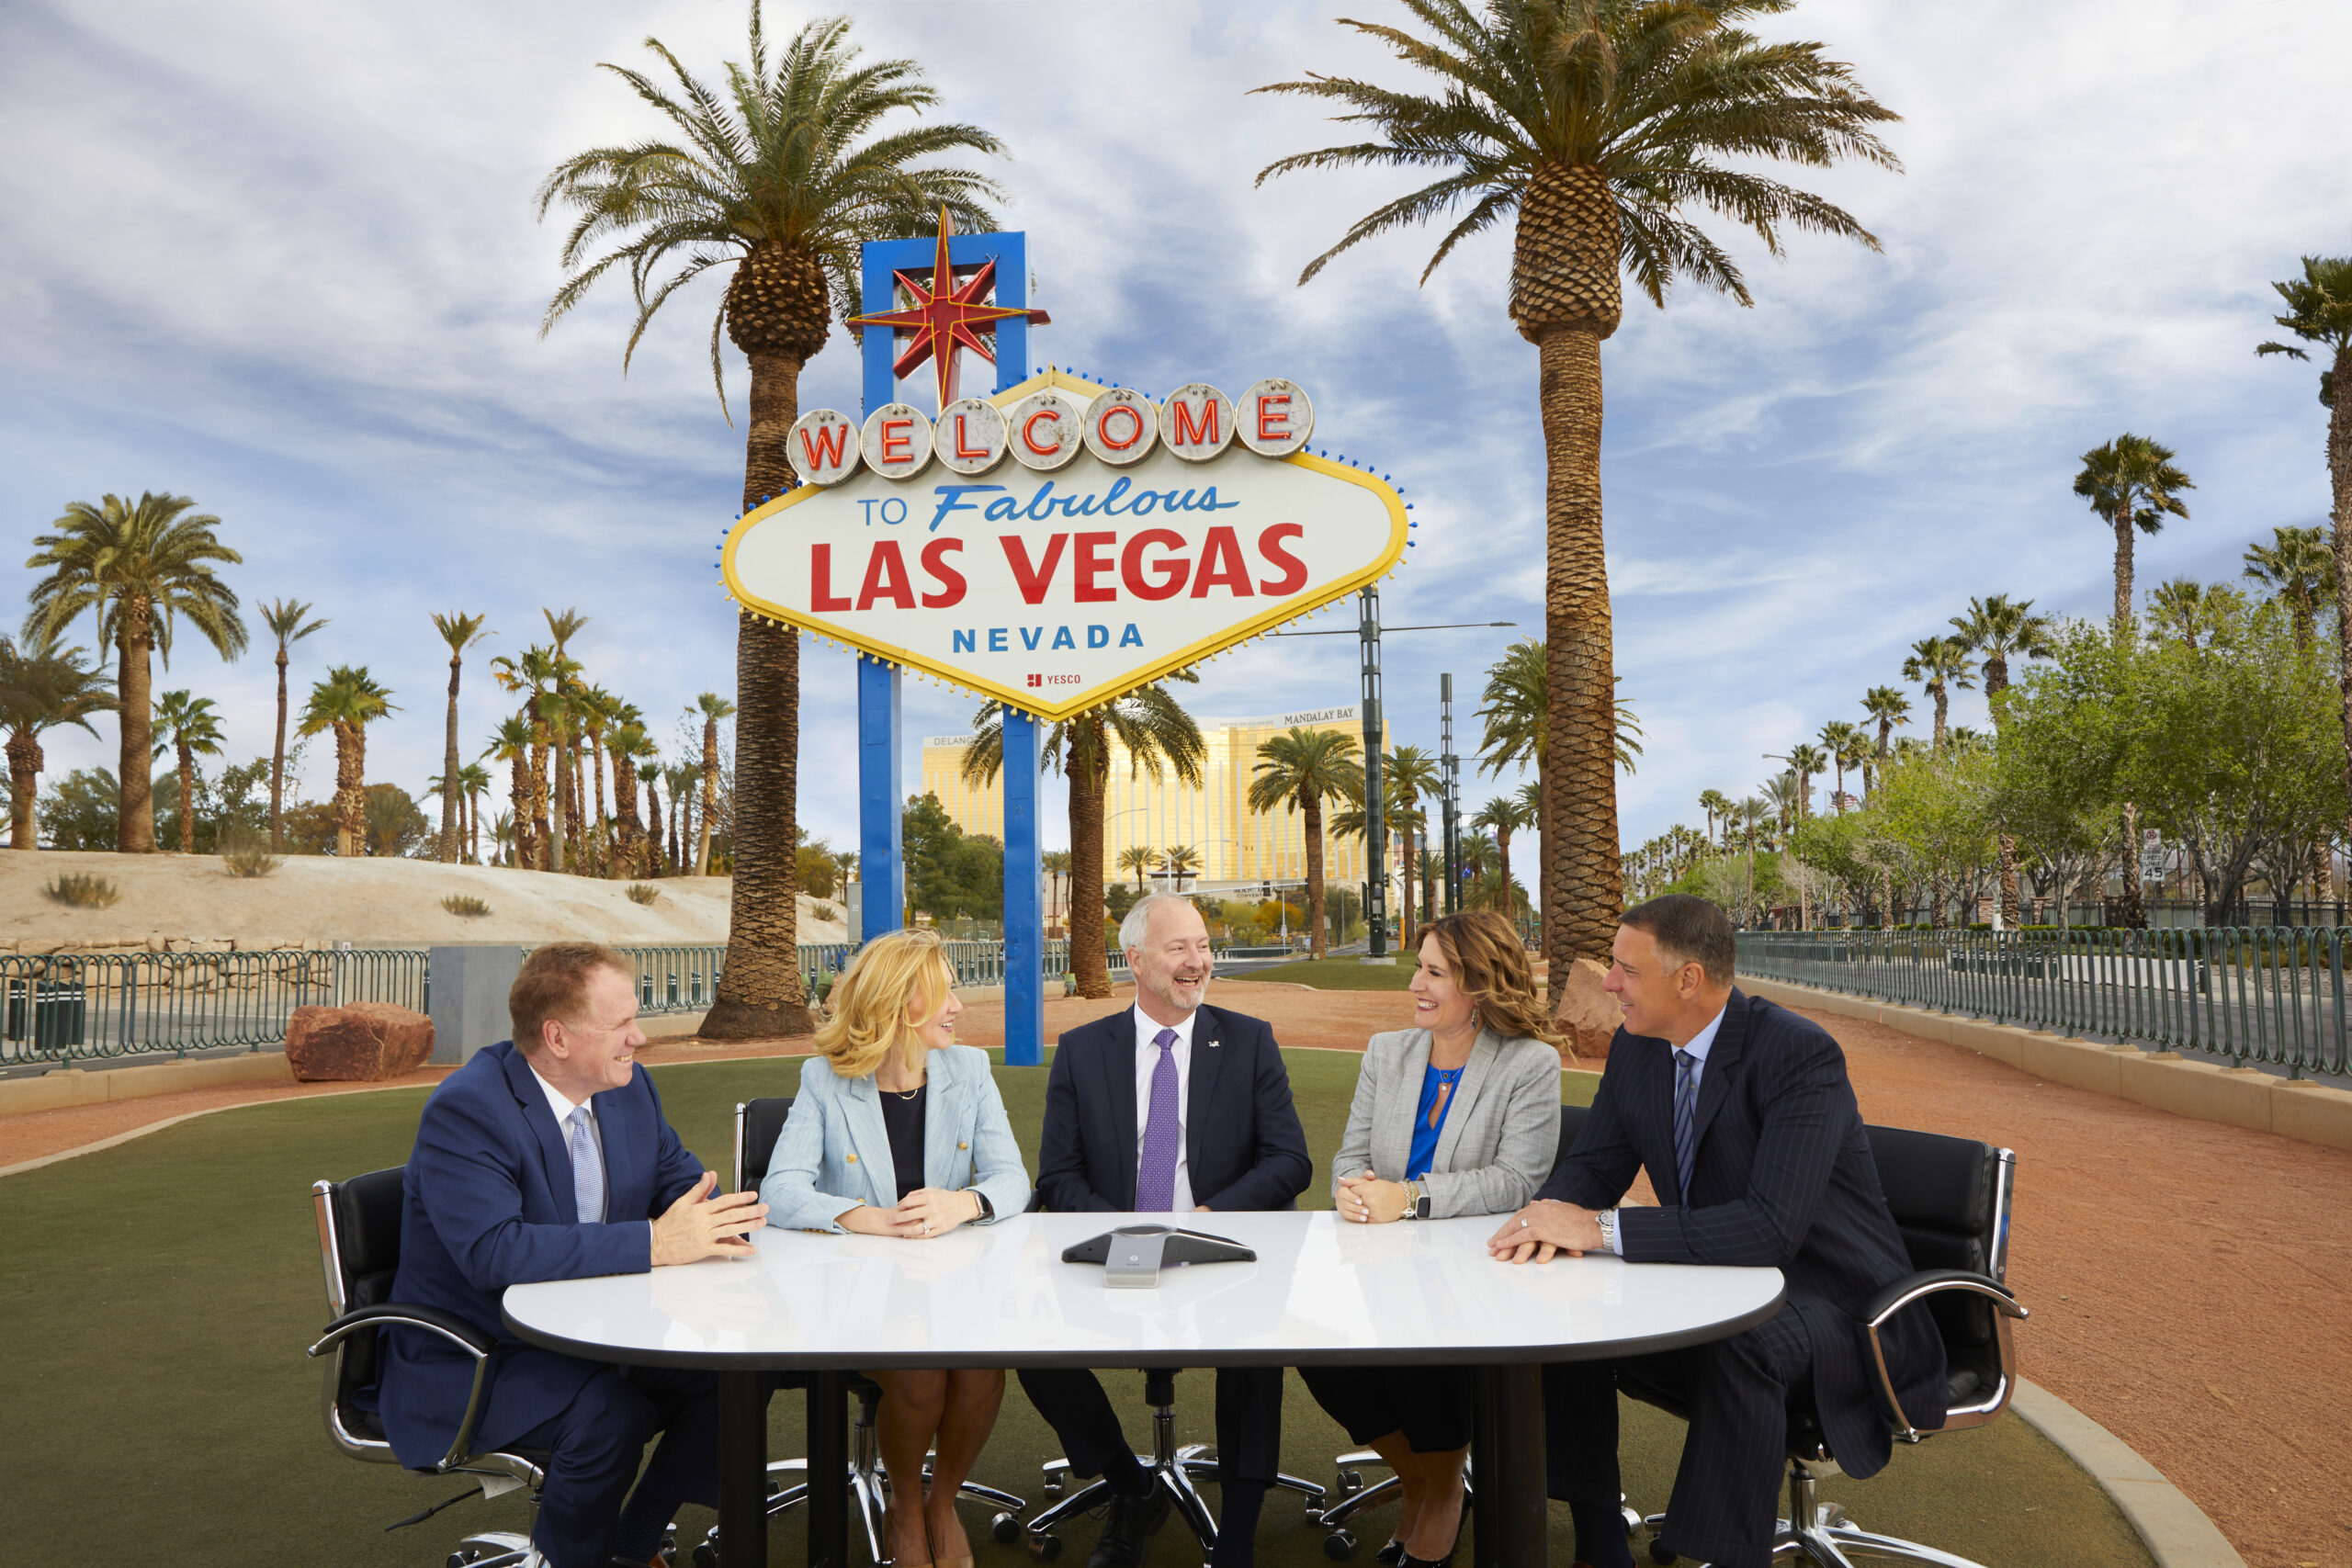 A series of executives sitting in front of the "Welcome to Fabulous Las Vegas" sign.